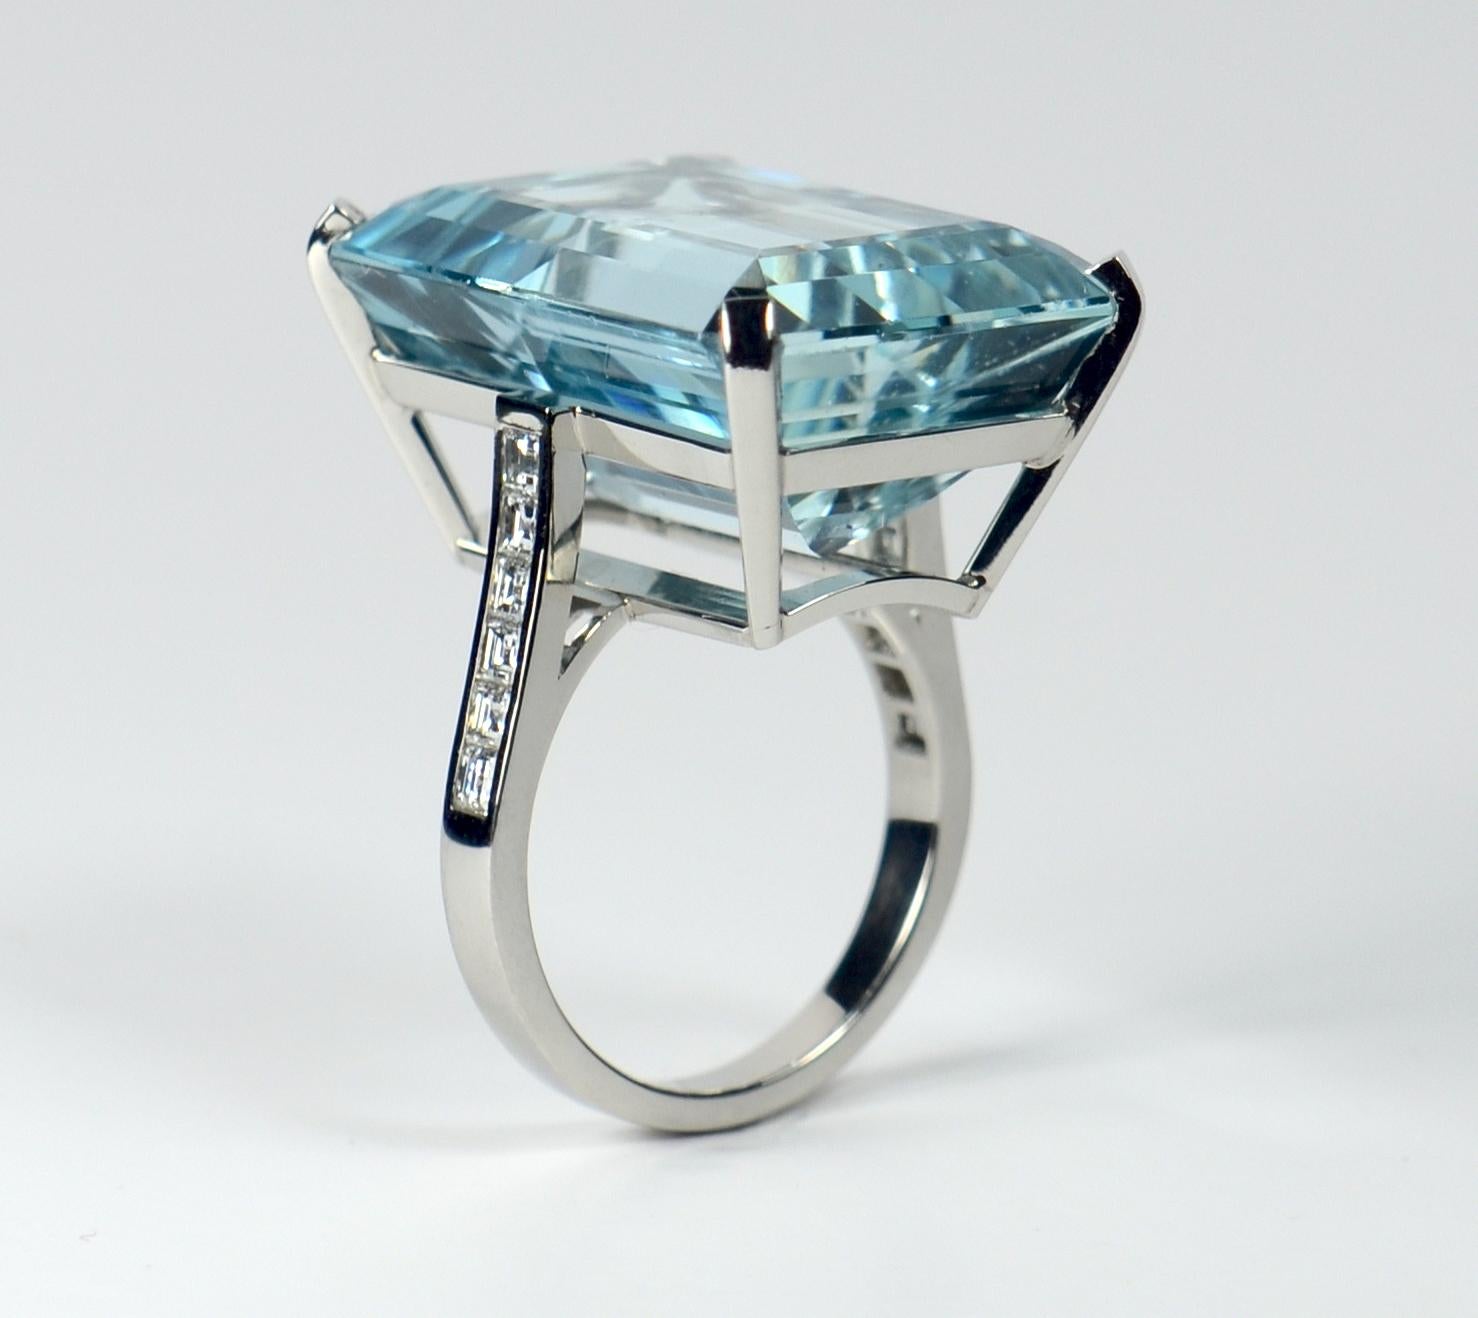 32.70 Carat Aquamarine and Diamond Cocktail Ring For Sale at 1stDibs ...